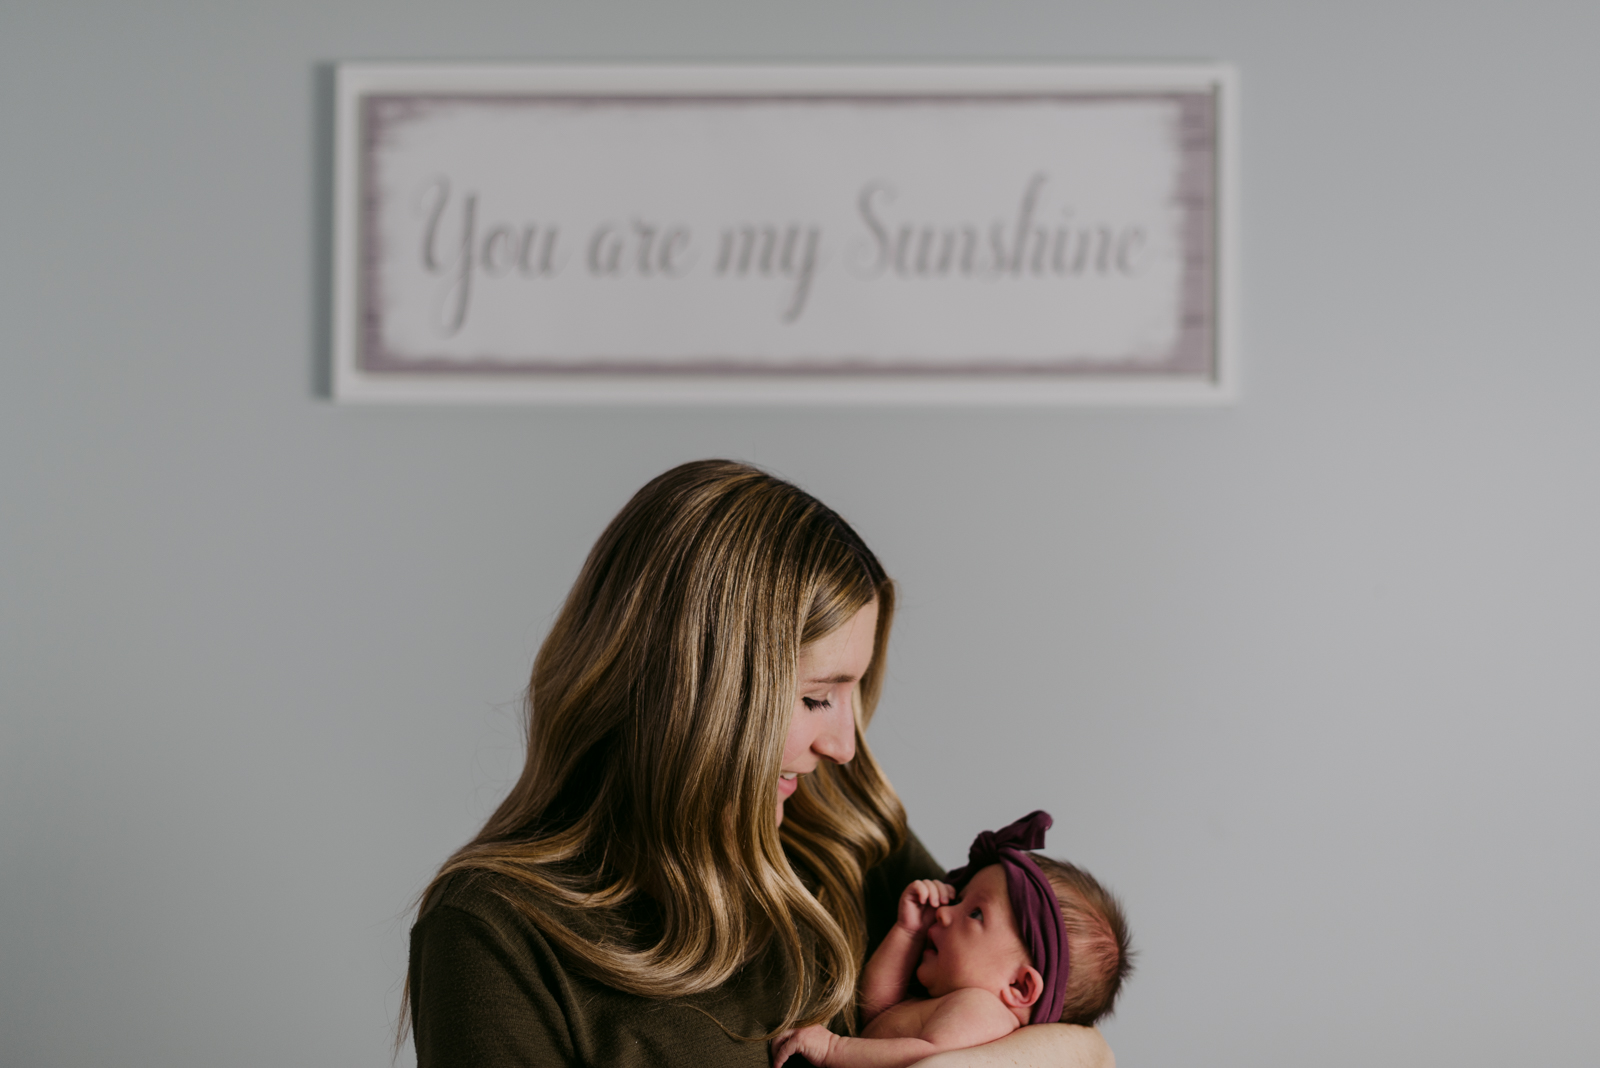 mom and baby girl with bow and sign that says "you are my sunshine"